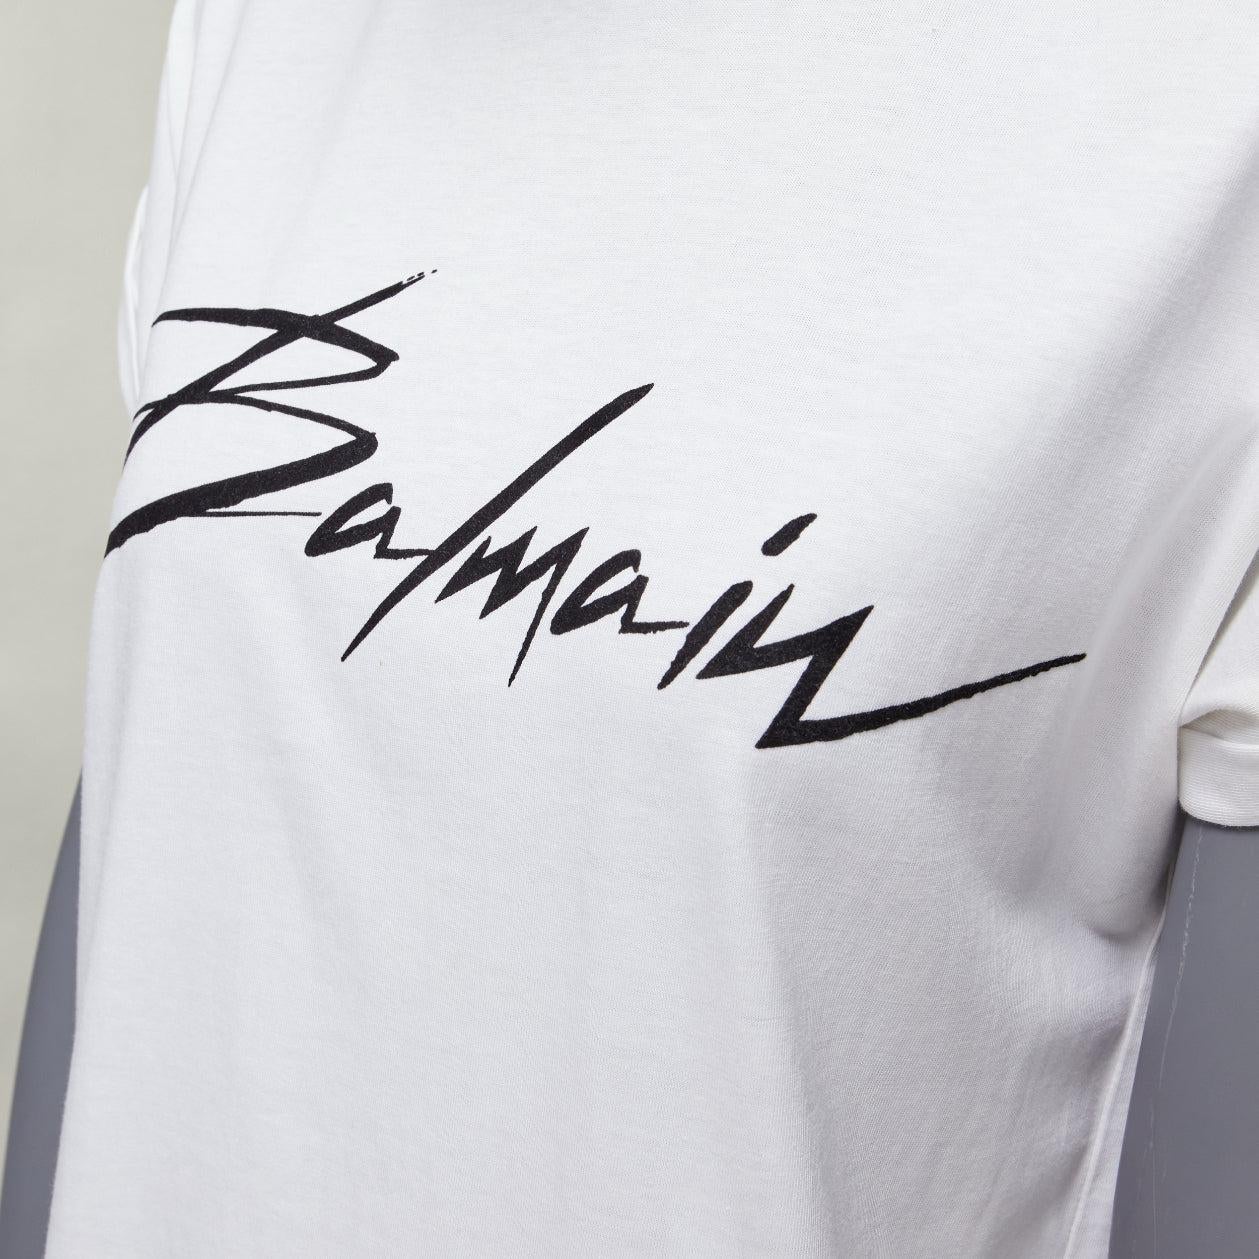 BALMAIN black signature logo velvet print cuffed sleeve white tshirt FR34 XS
Reference: AAWC/A00767
Brand: Balmain
Designer: Olivier Rousteing
Material: Cotton
Color: White, Black
Pattern: Solid
Extra Details: Velvet print logo. Cuffed sleeves.
Made